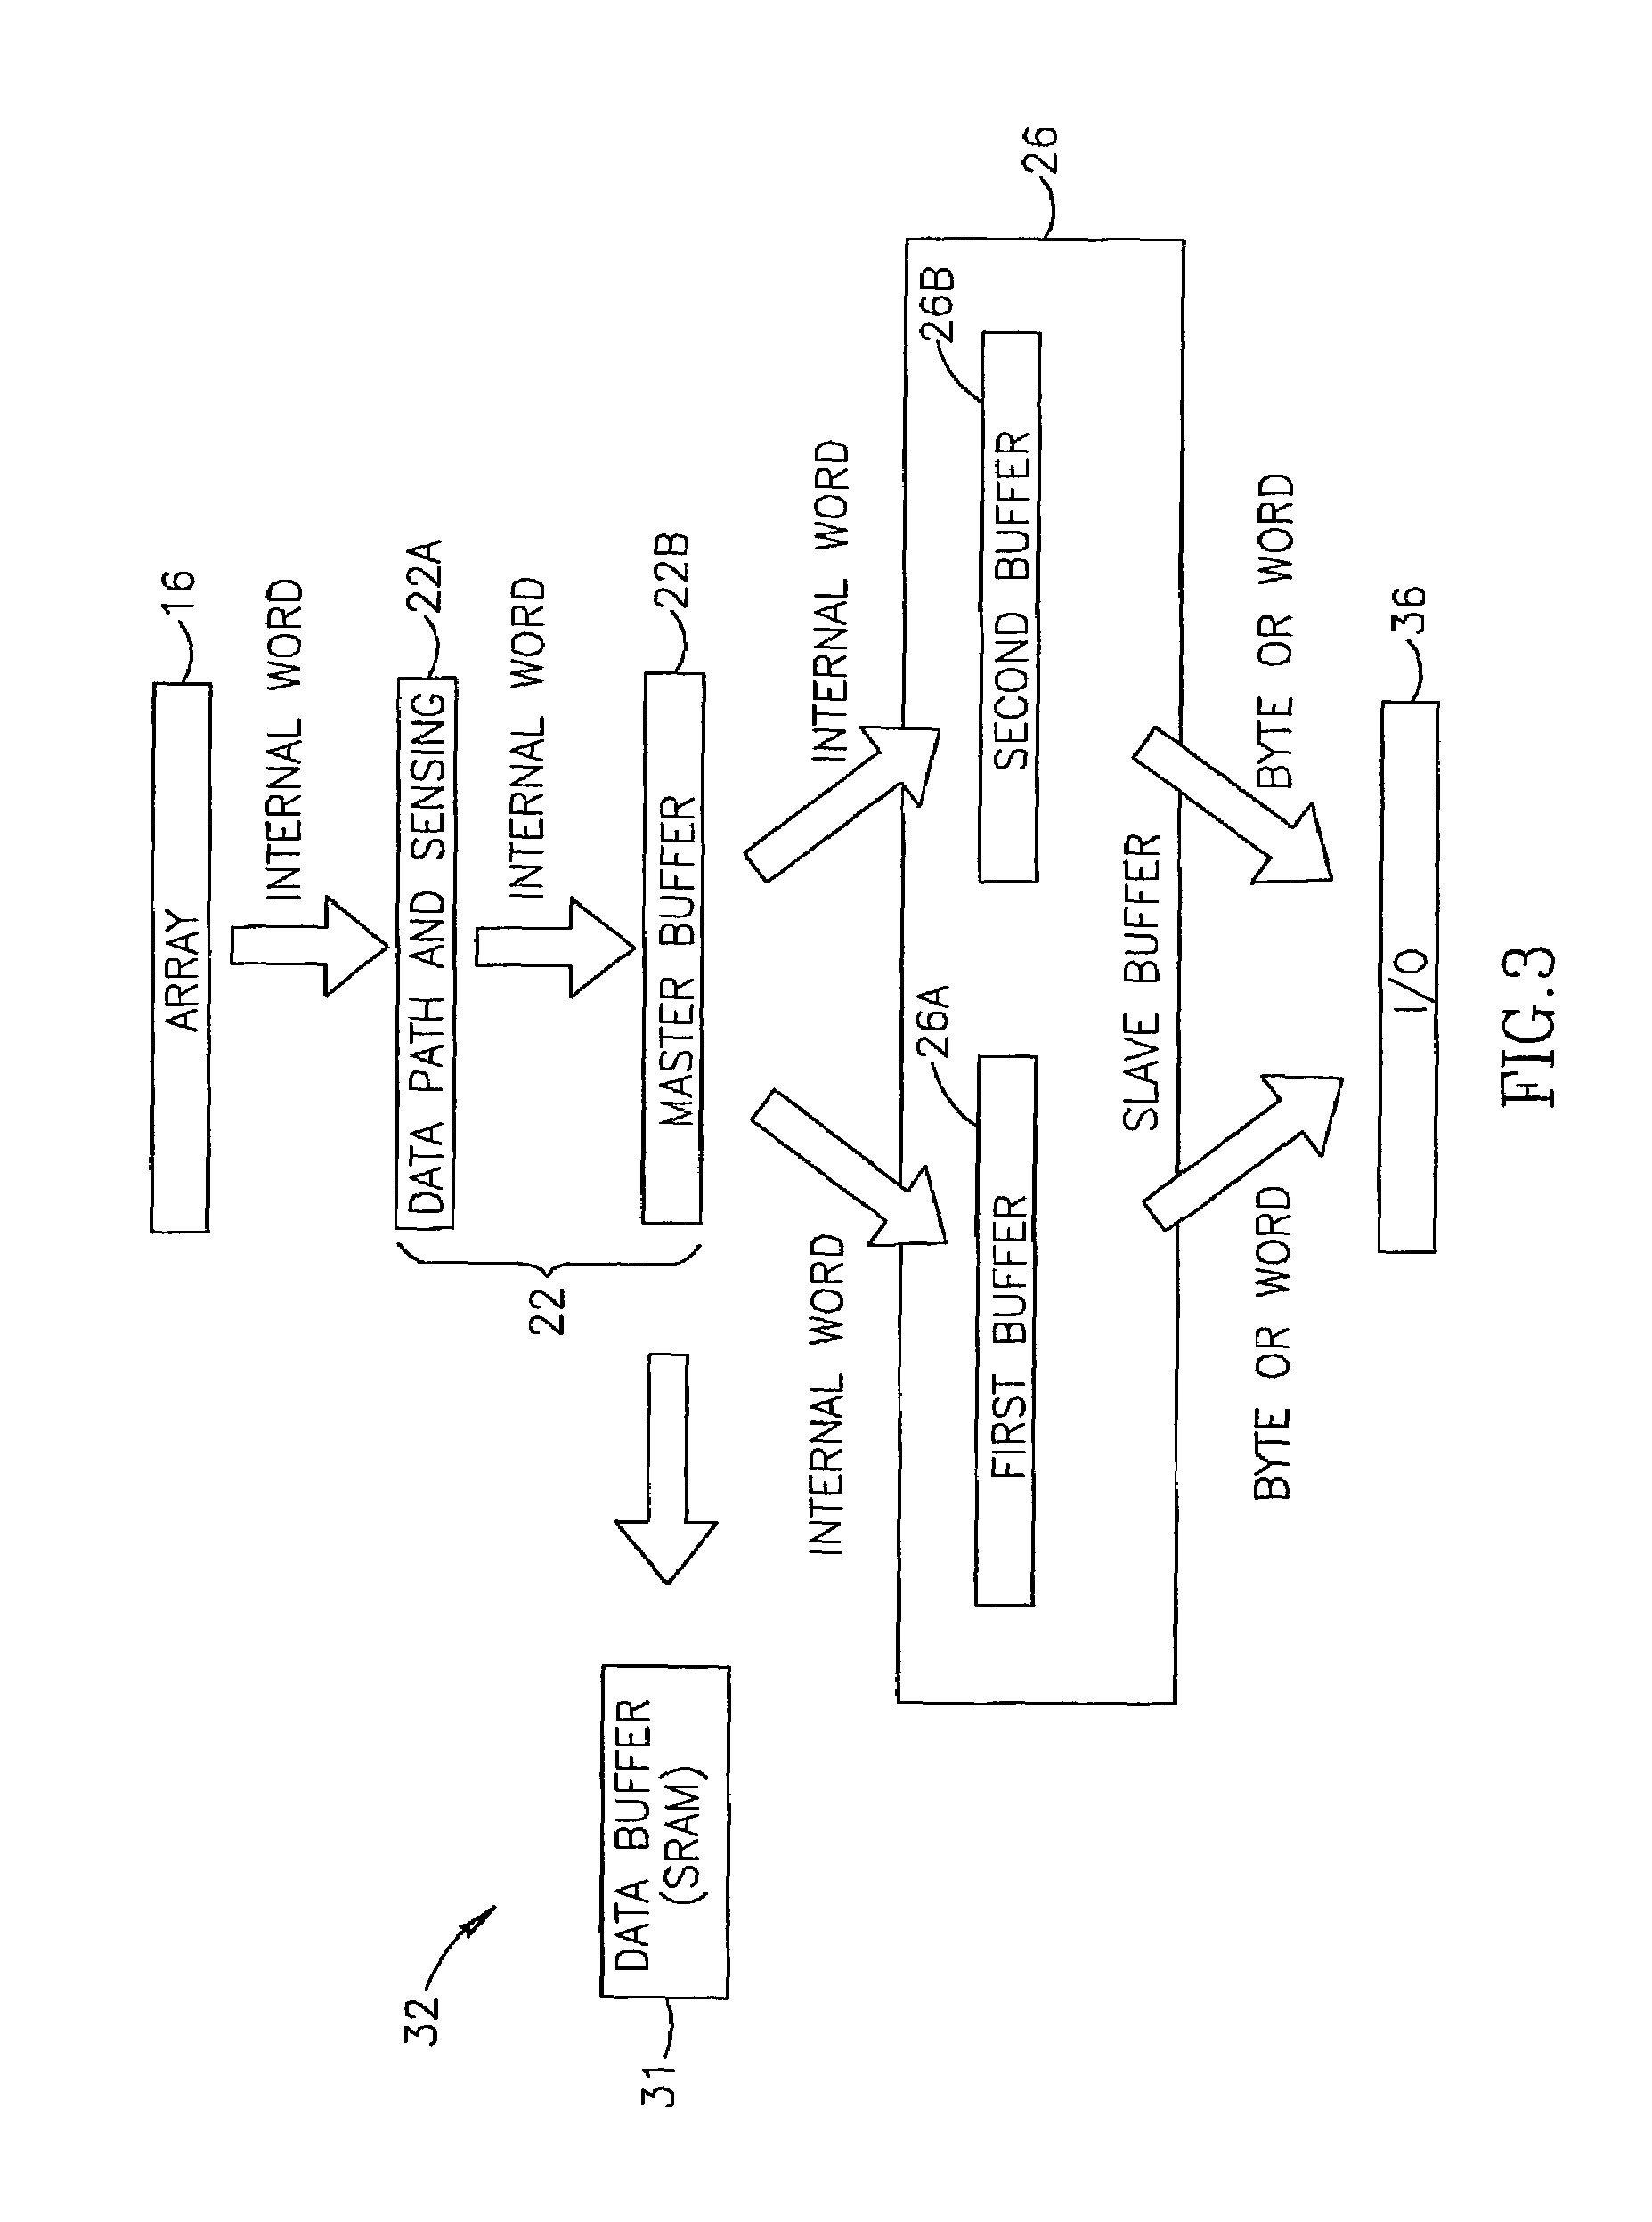 Mass storage device architecture and operation